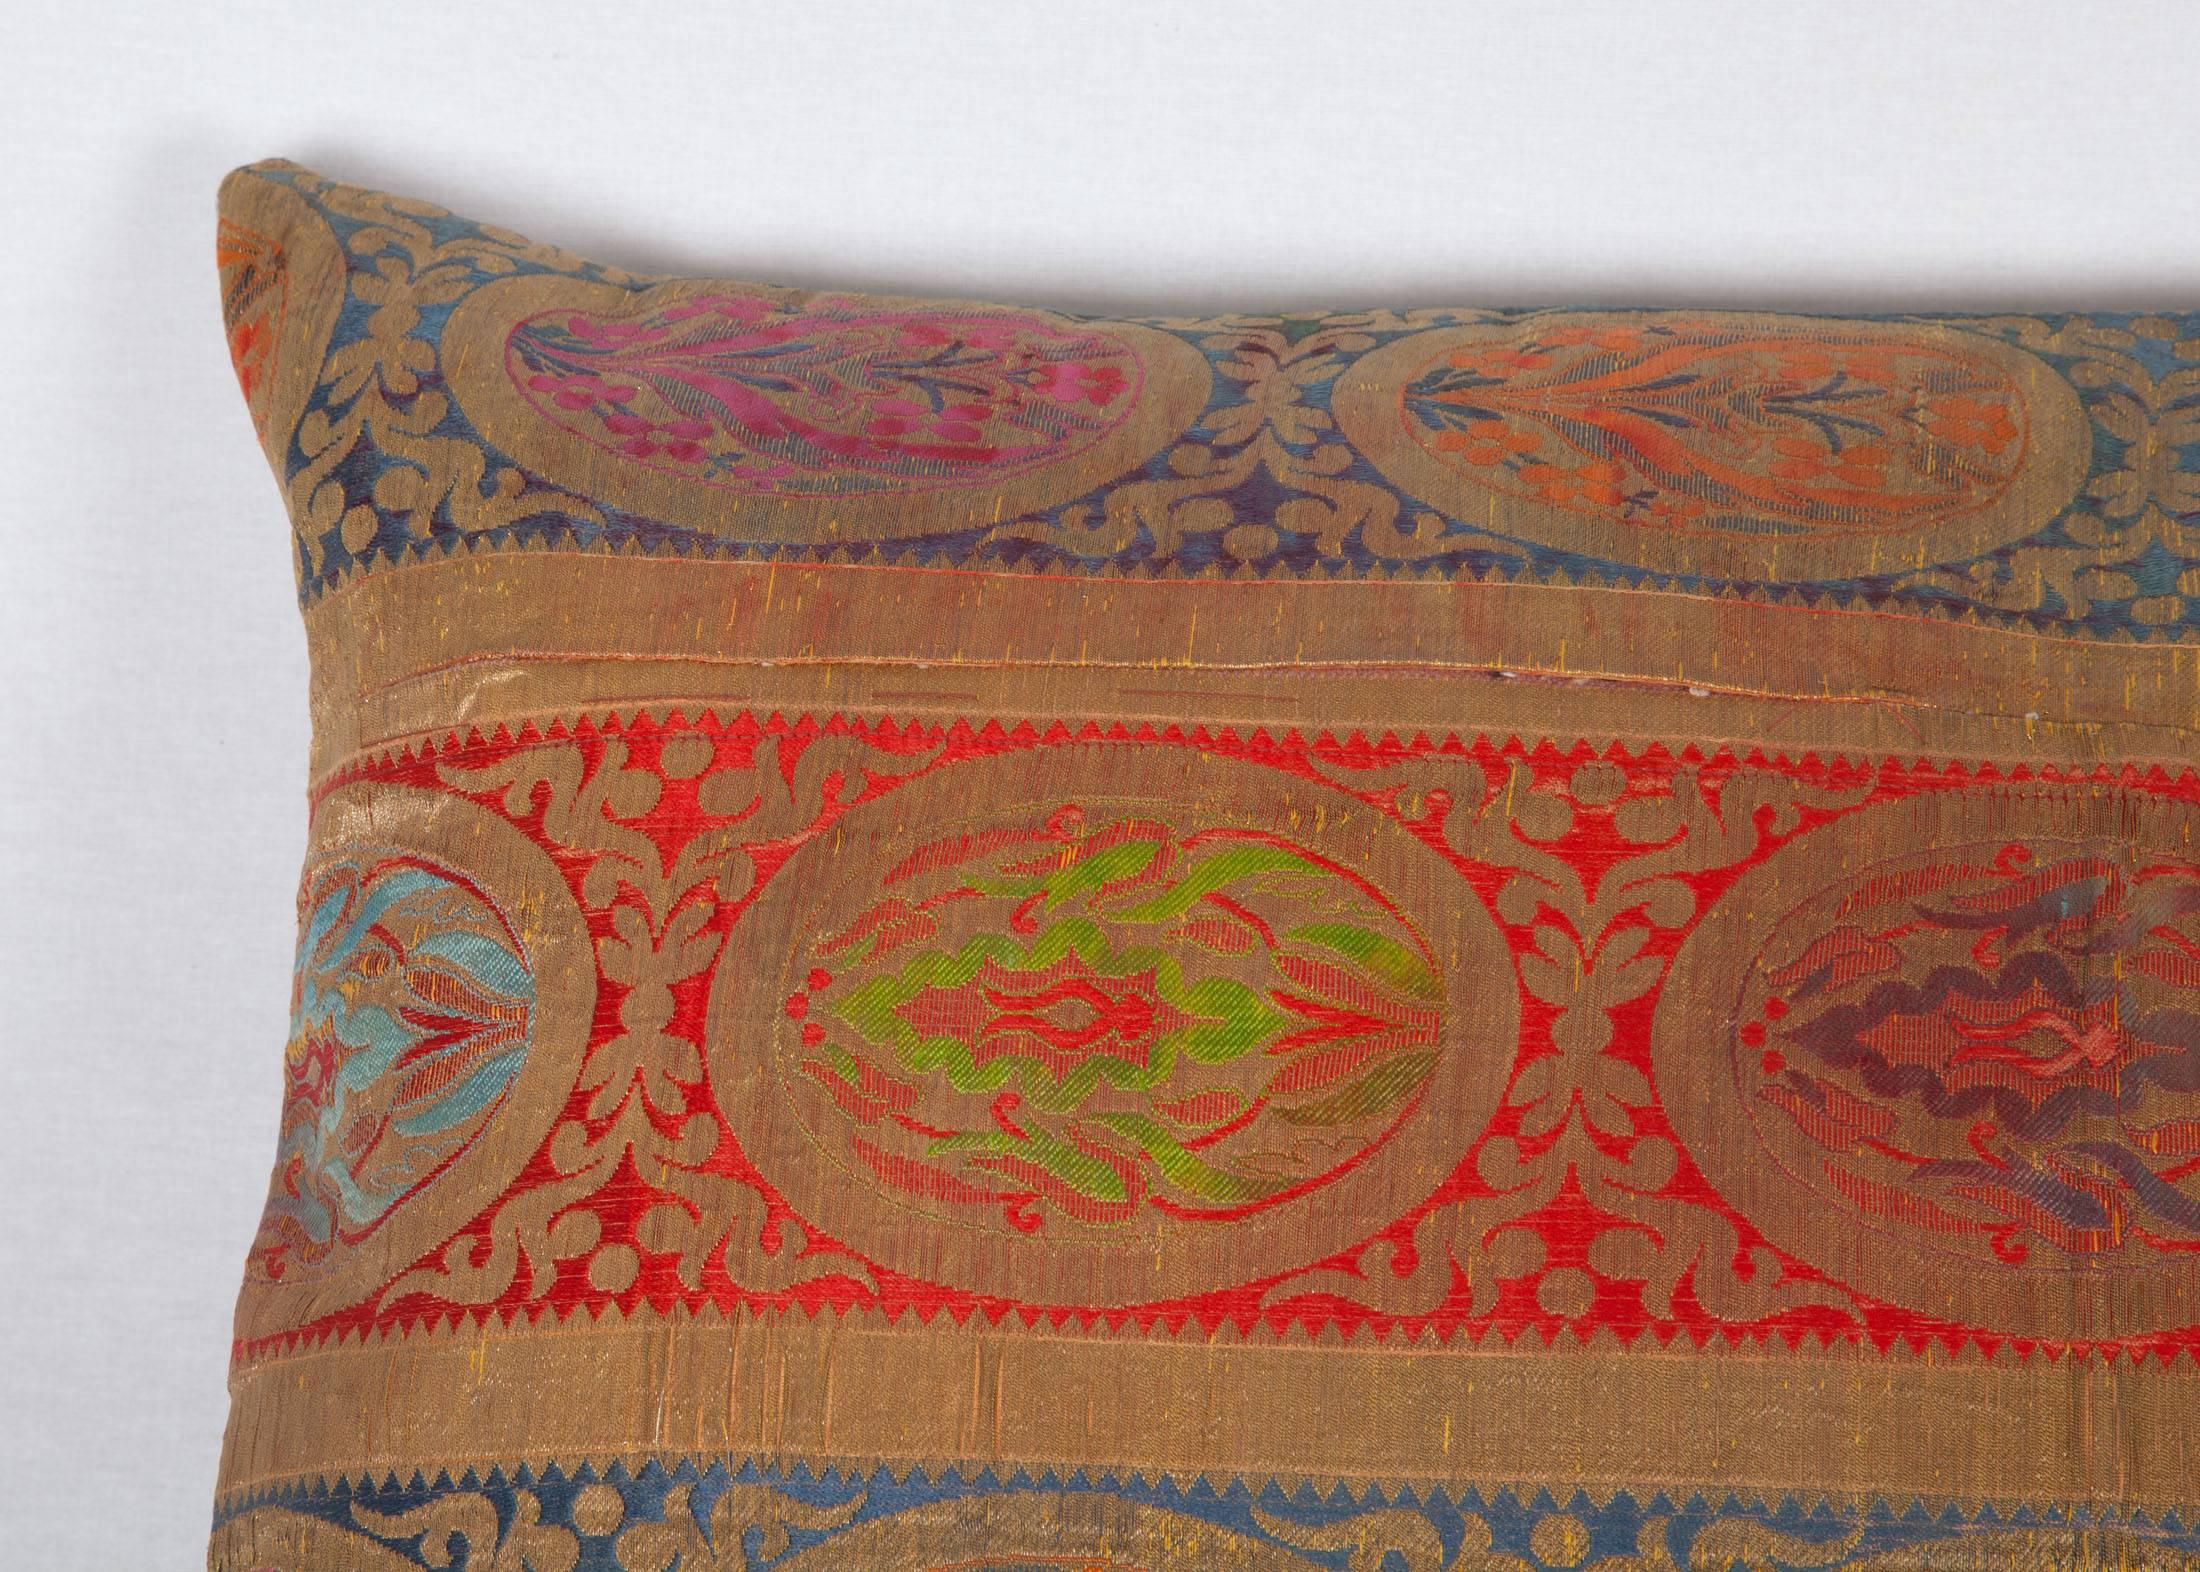 The pillow is made out of an early 20th century, brocaded textile from Central Asia, probably Uzbekistan.
It does not come with an insert but it comes with a bag made to the size and out of cotton to accommodate the filling.
The backing is made of